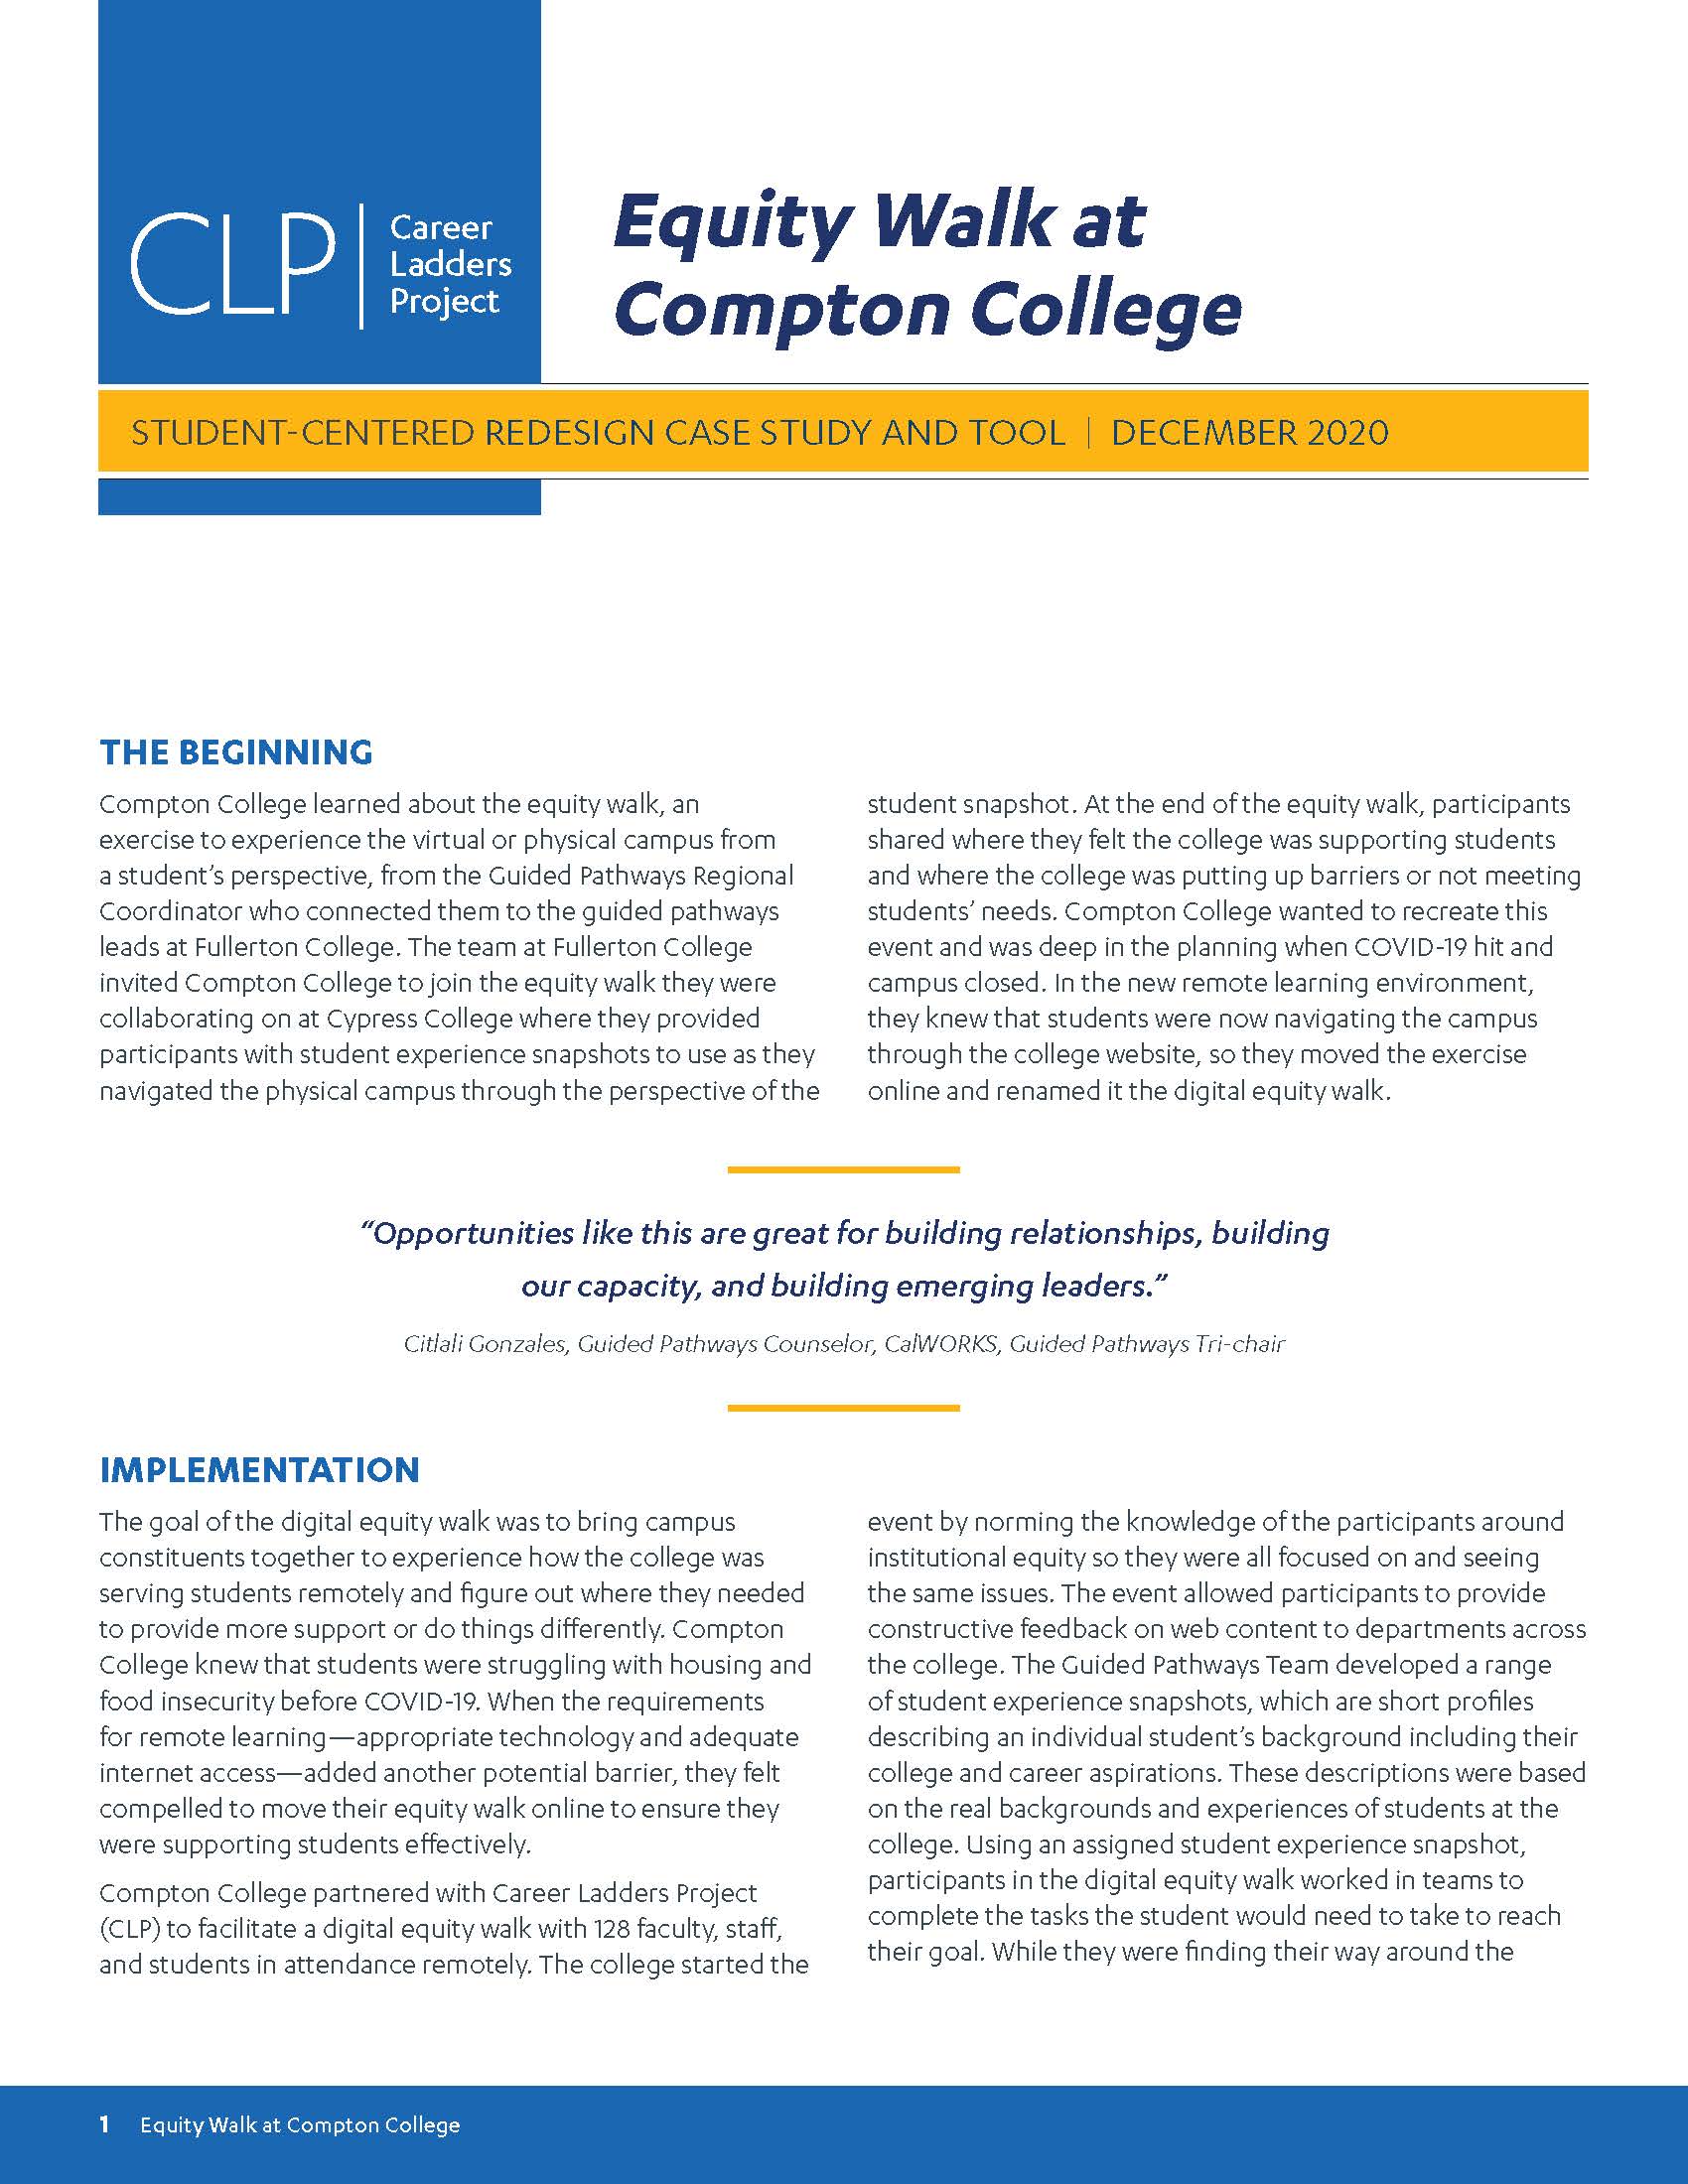 Equity Walk at Compton College-Cover Page